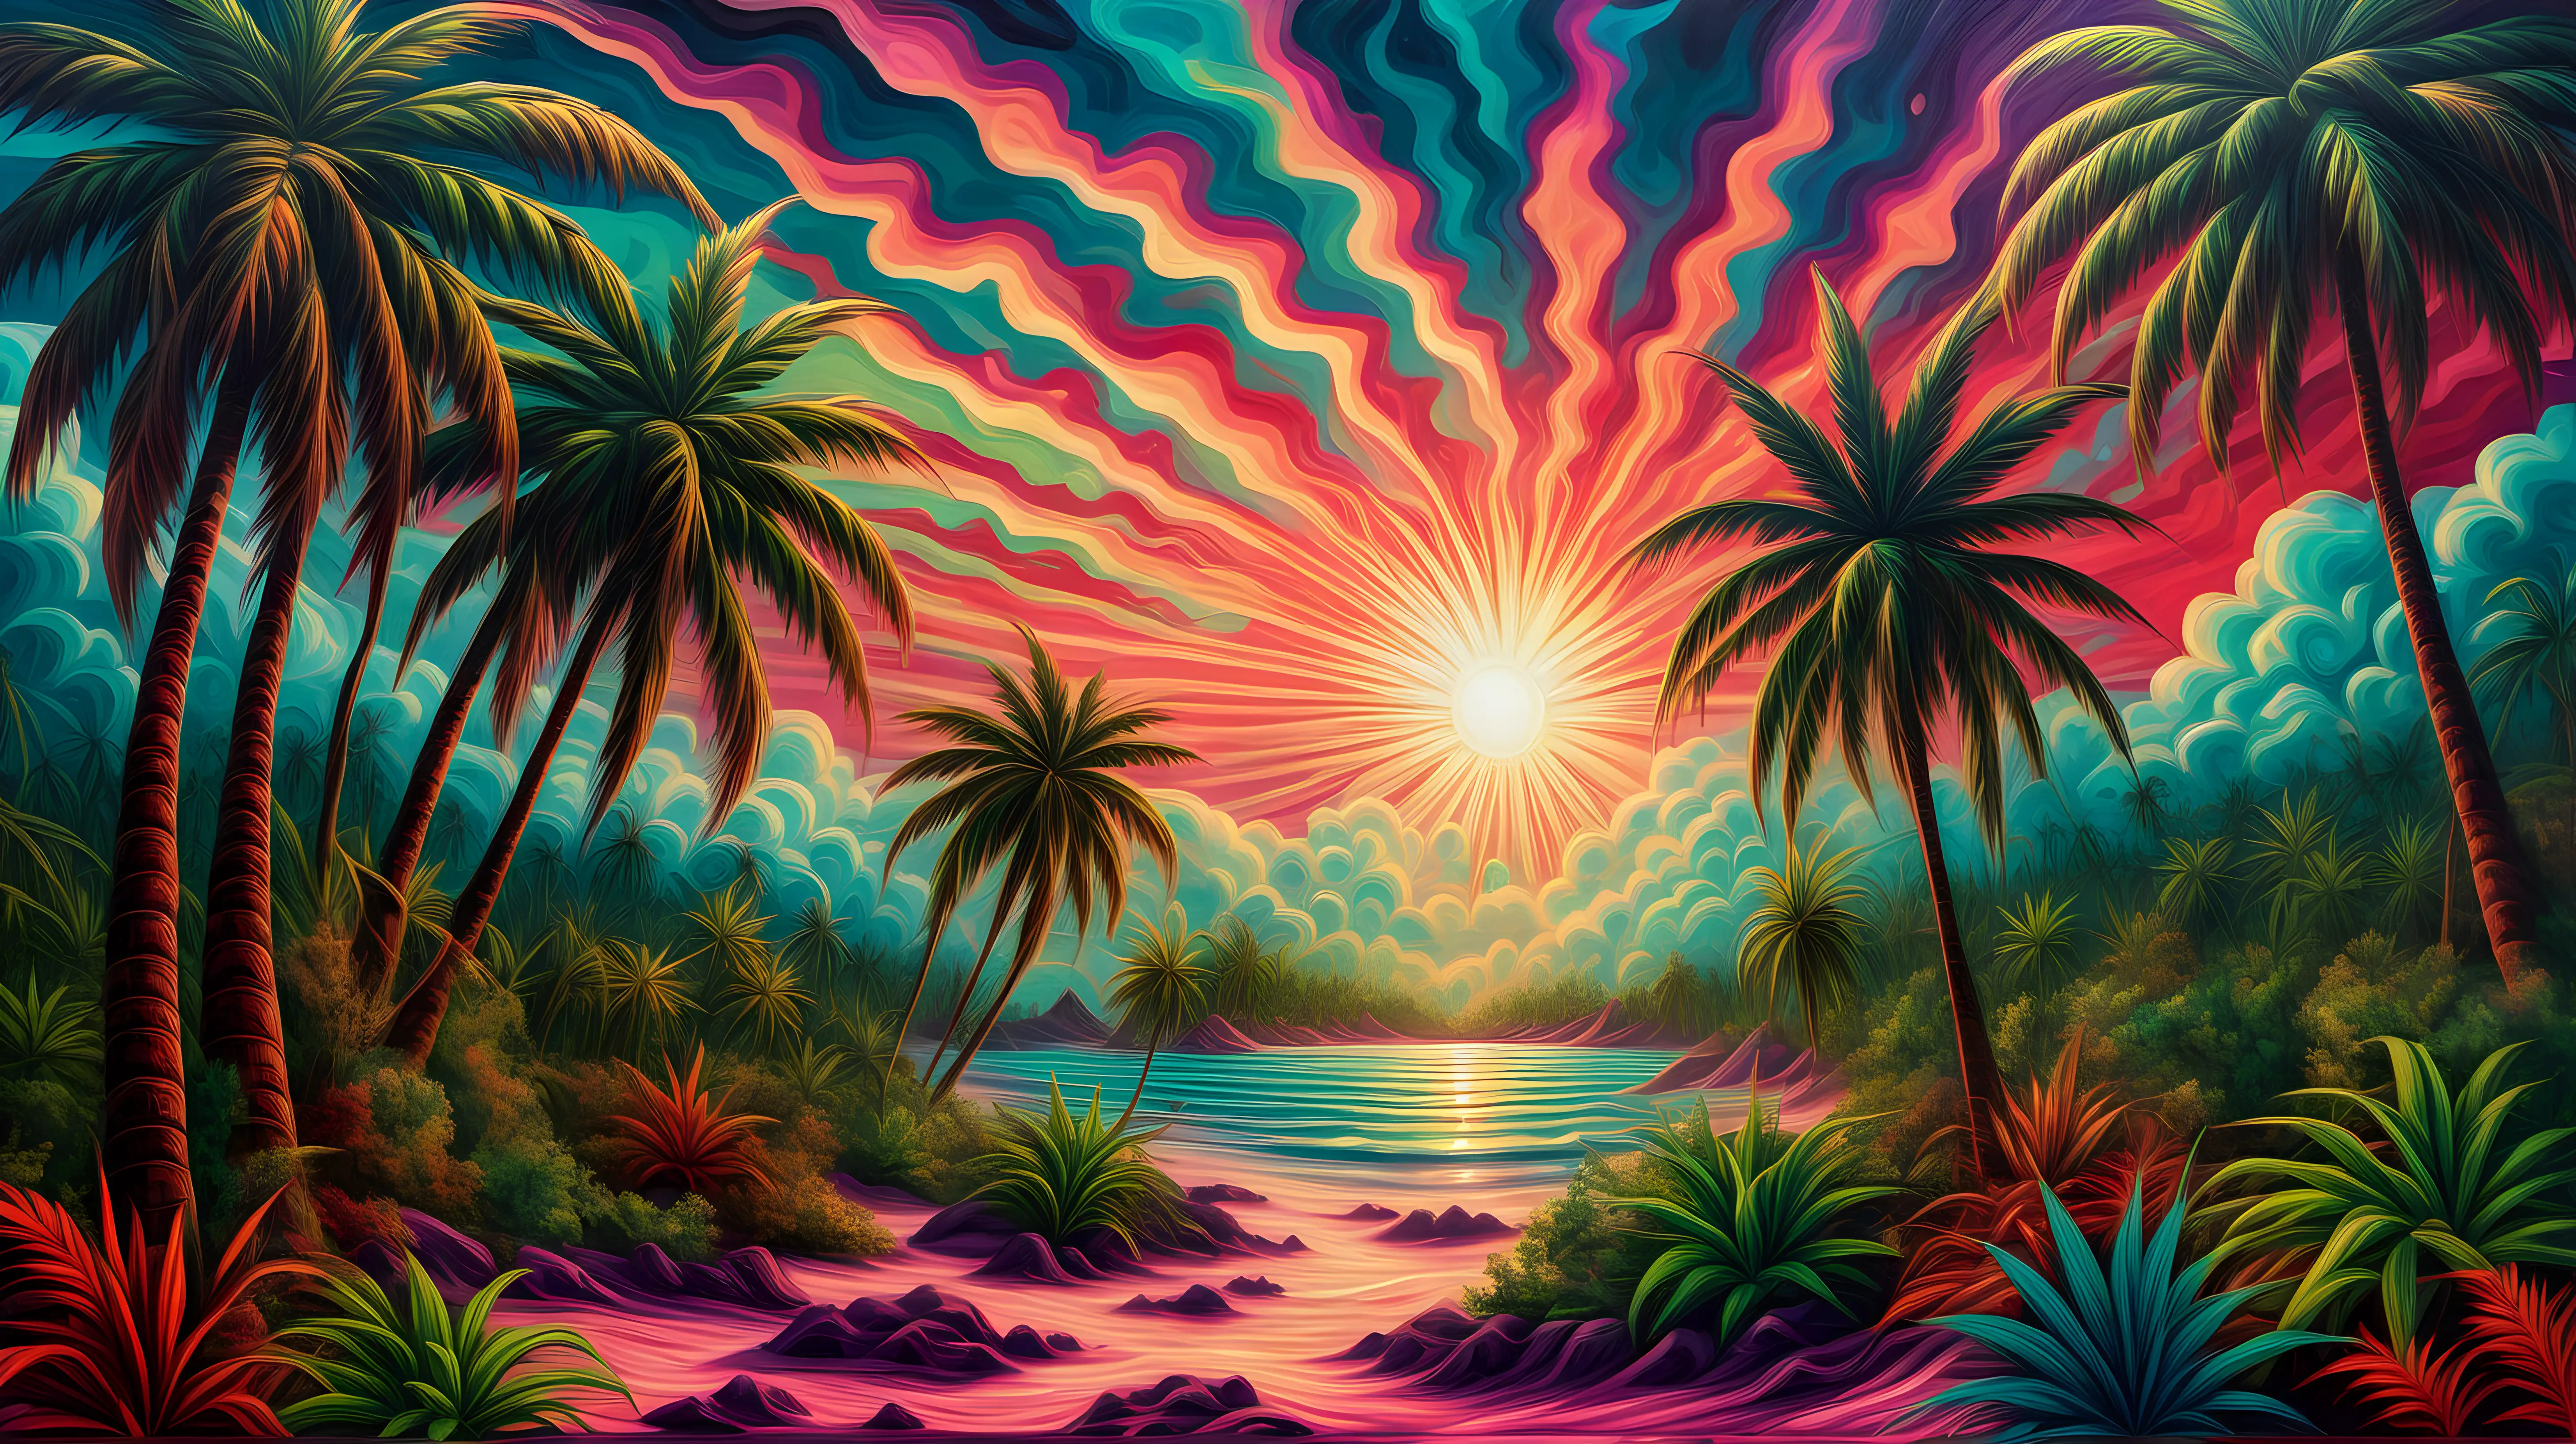 an oil painting of a tropical landscape, trippy art style, psychedelic sky sun effects, palm trees look like cannabis plants